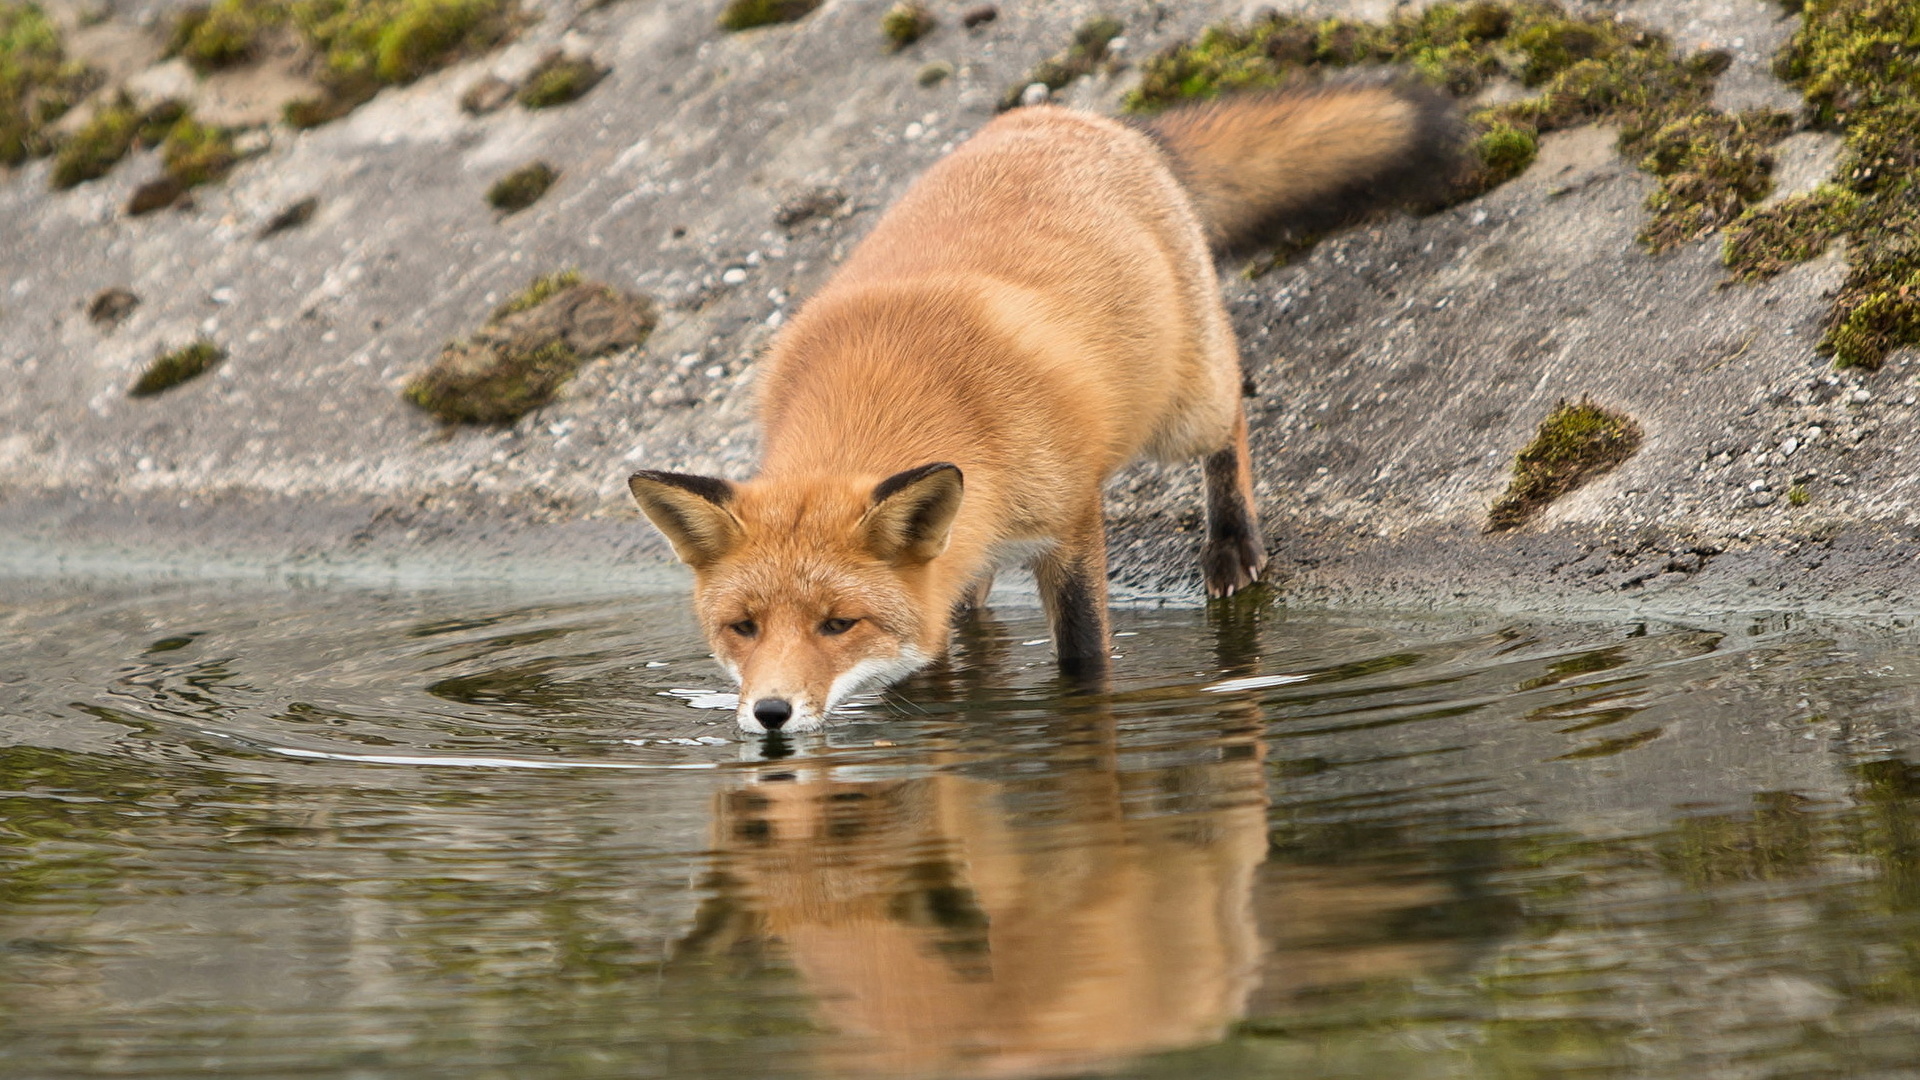 Wallpaper Foxes Drinking water Water Animals 1920x1080